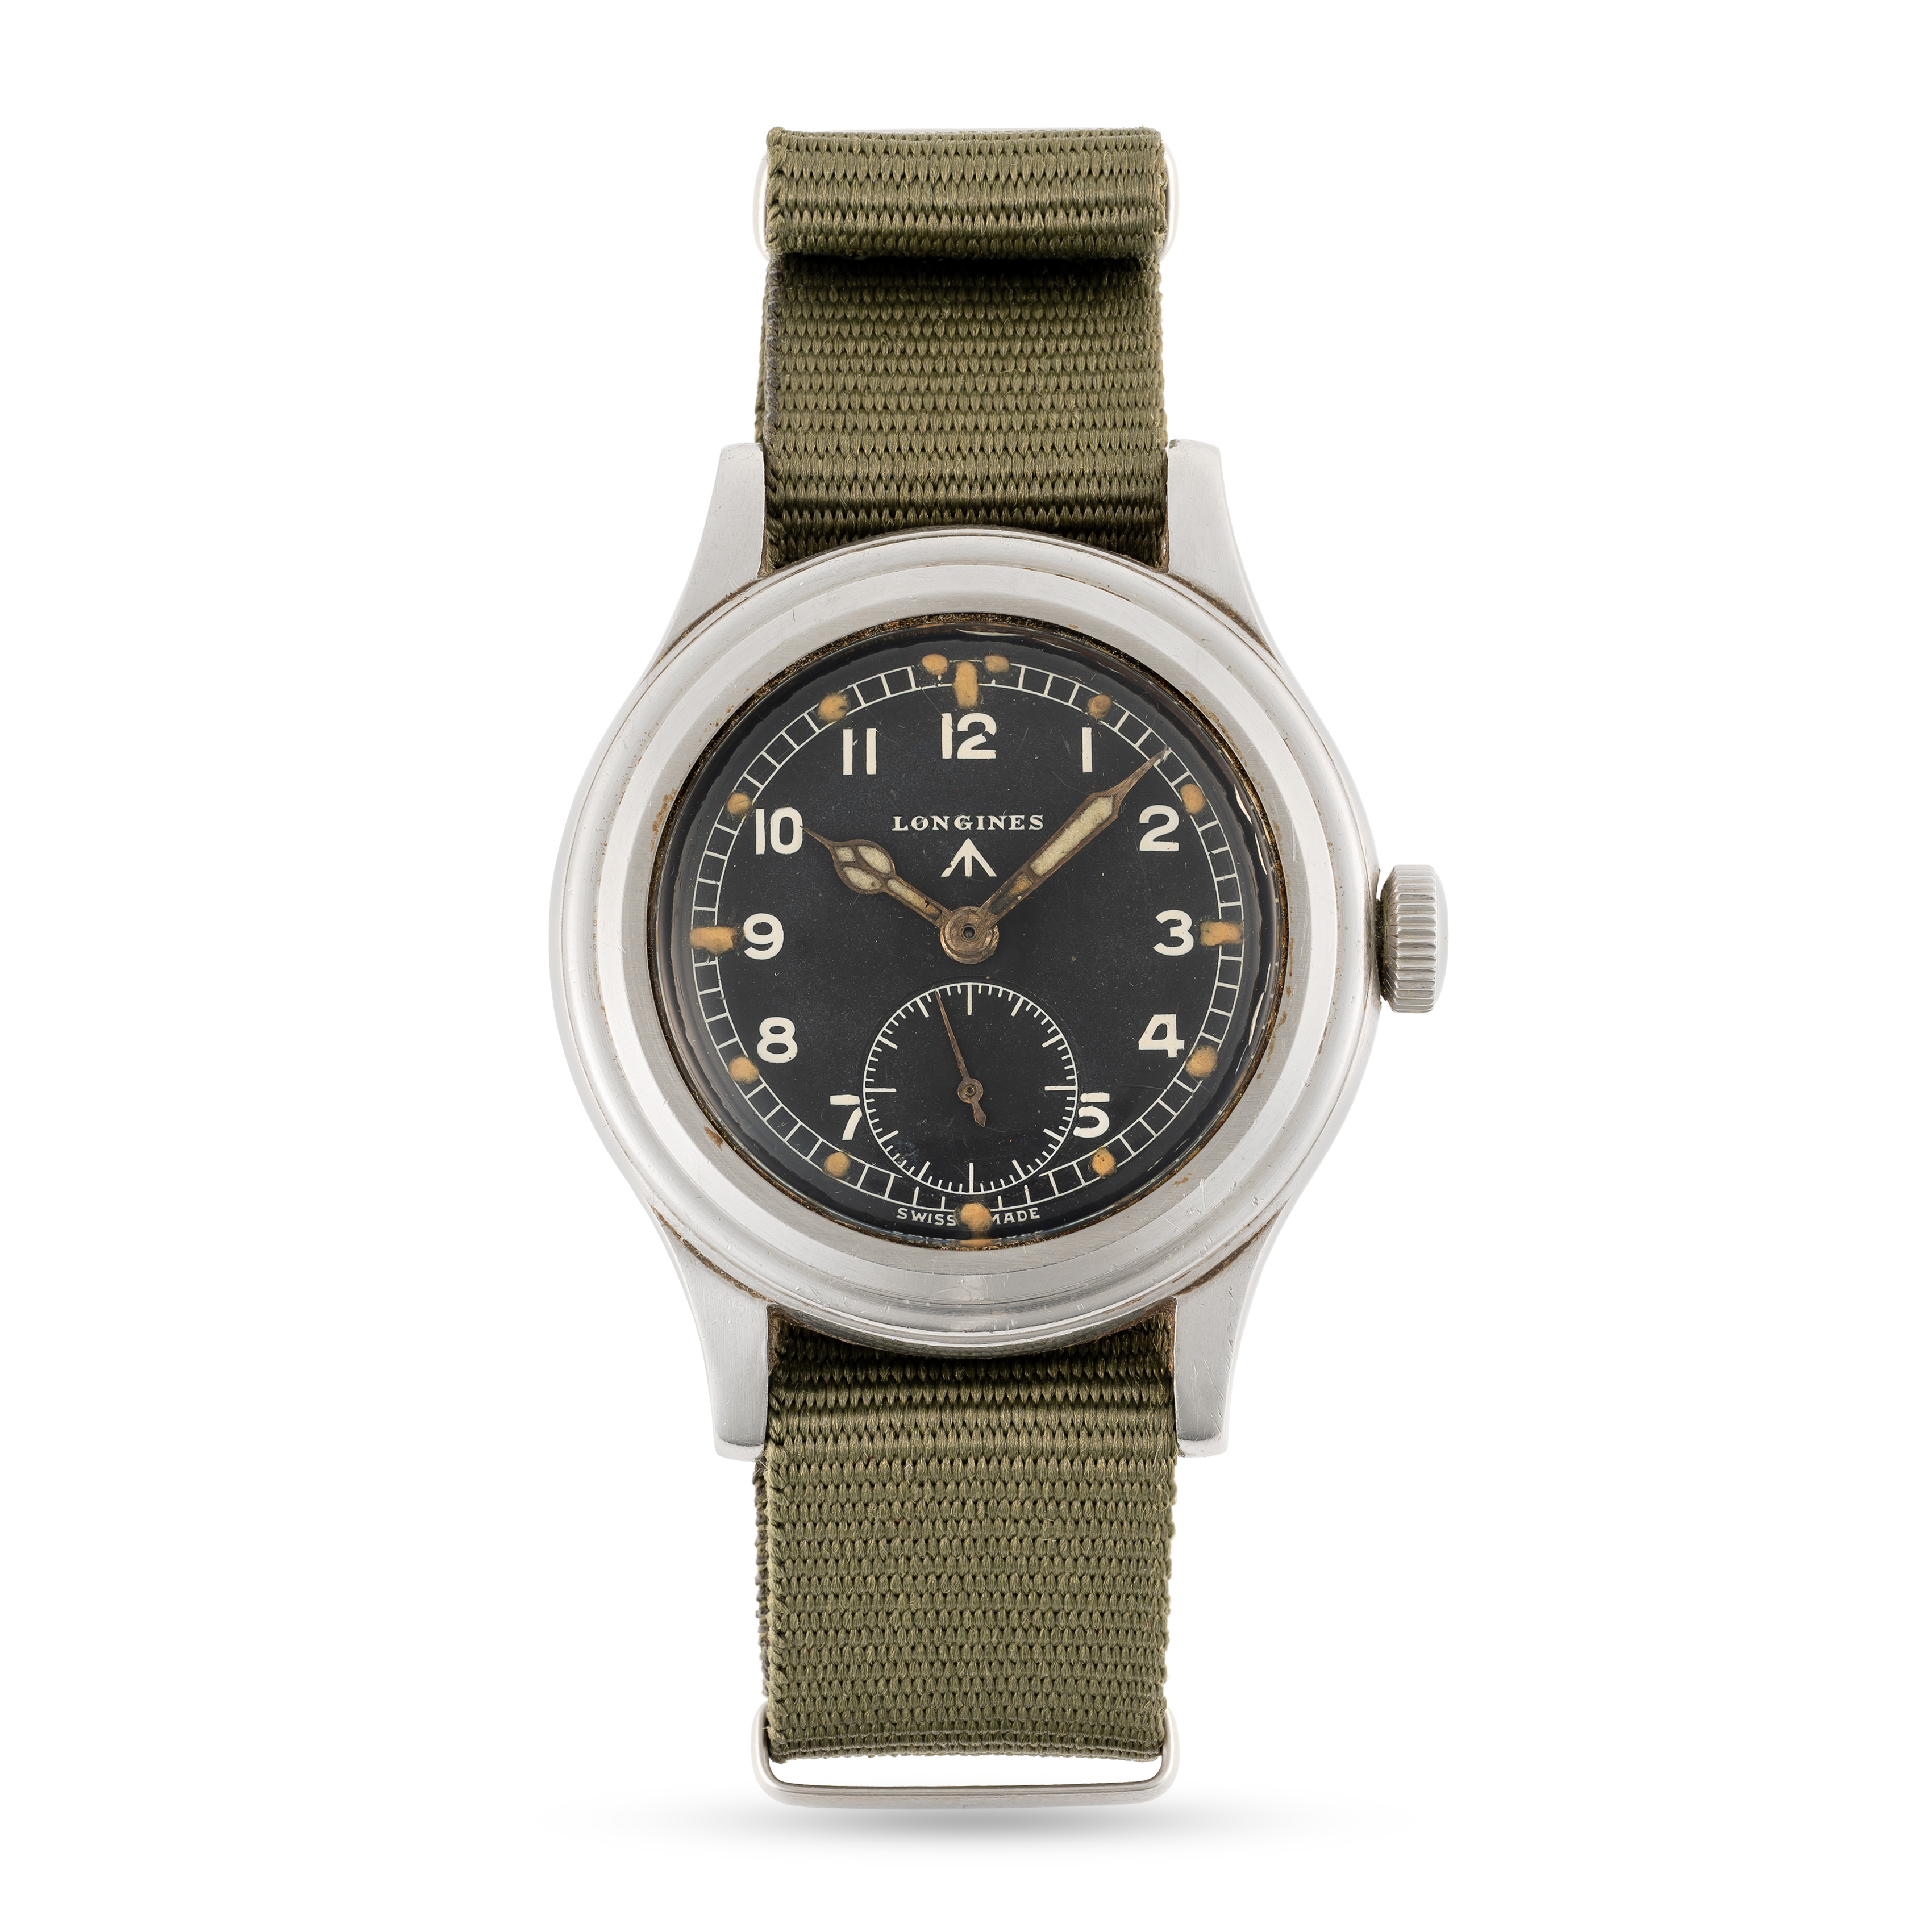 A GENTLEMAN'S STAINLESS STEEL BRITISH MILITARY LONGINES W.W.W. WRIST WATCH CIRCA 1945, PART OF - Image 2 of 8